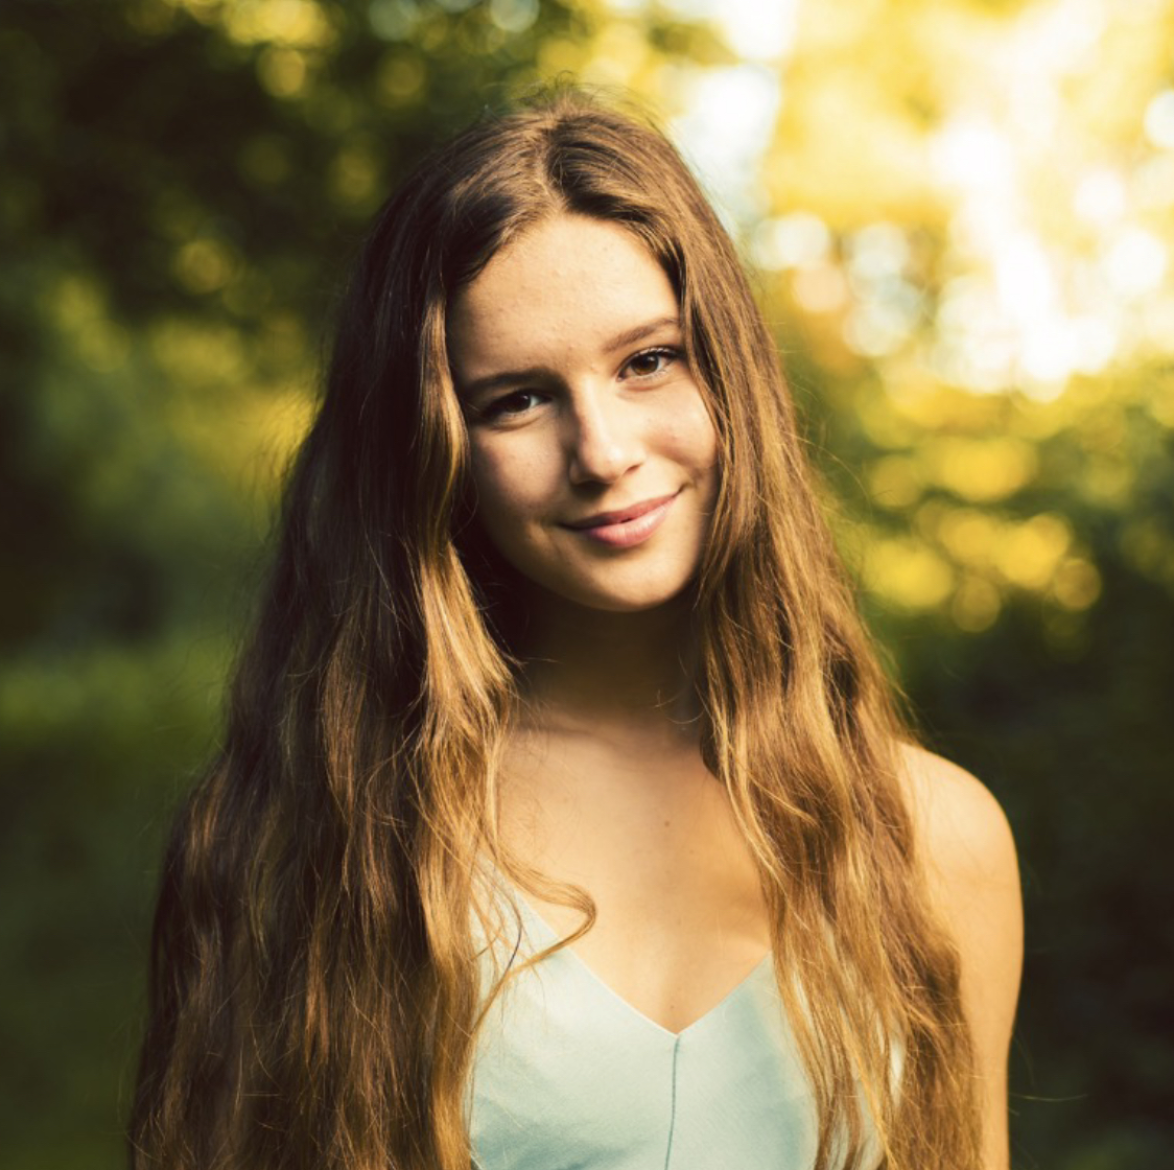 Portrait of young woman with long sandy hair smiling at viewer.